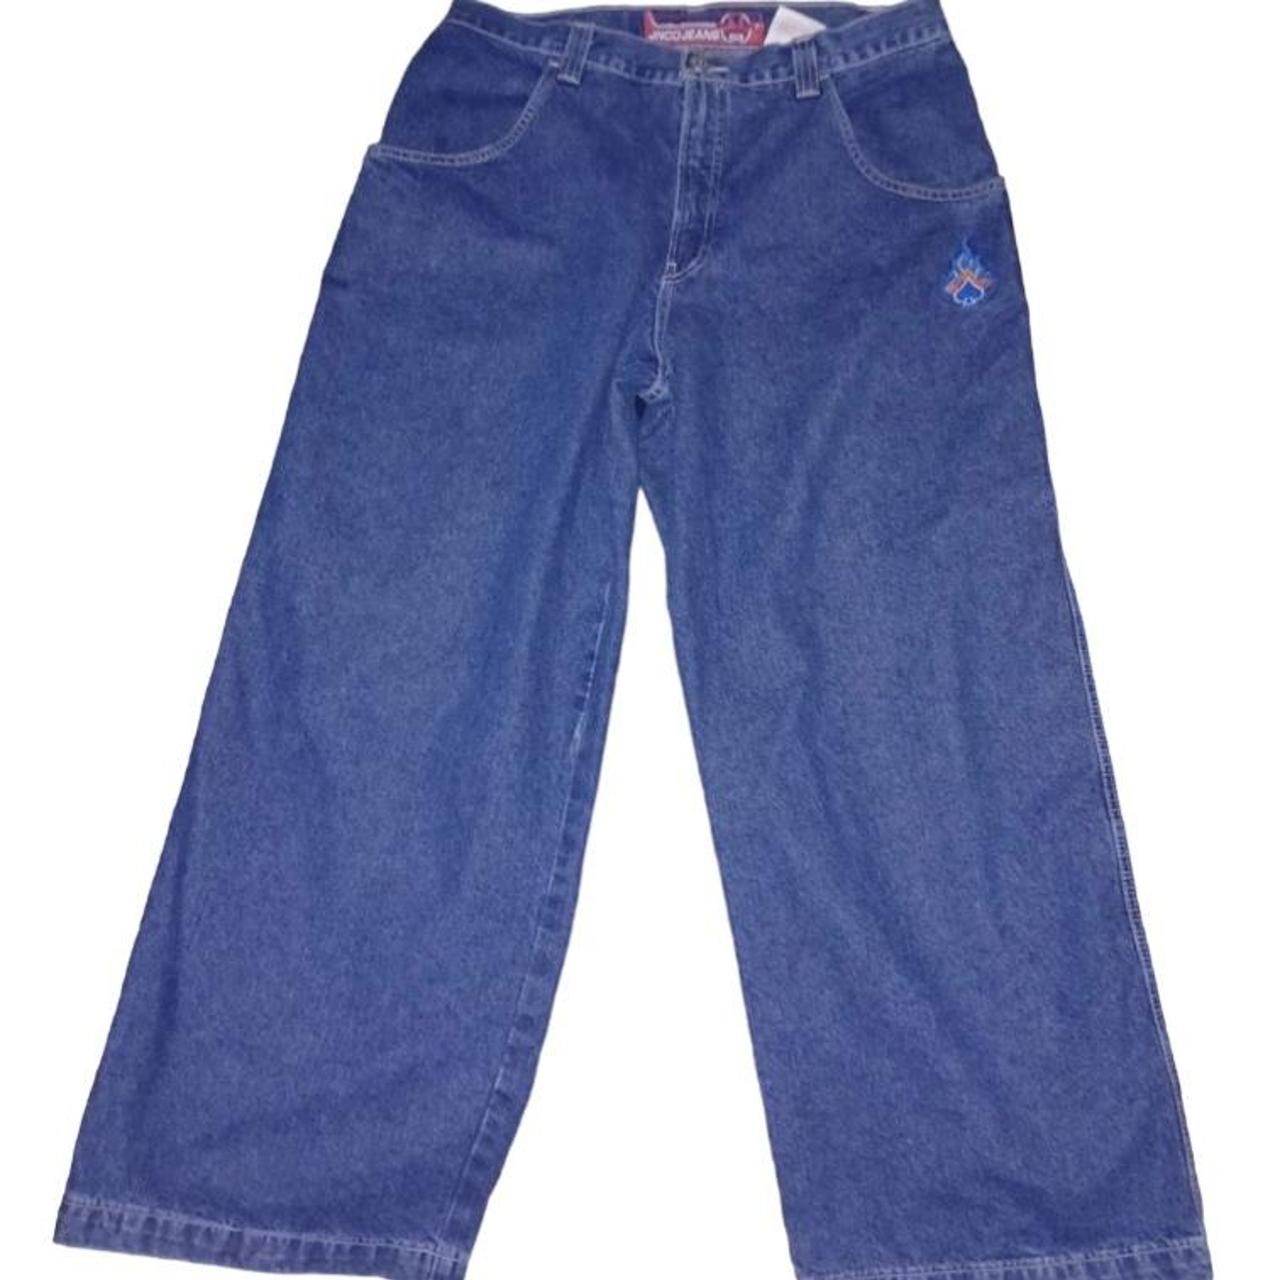 JNCO Ace of Spades Jeans very rare and hard to find... - Depop